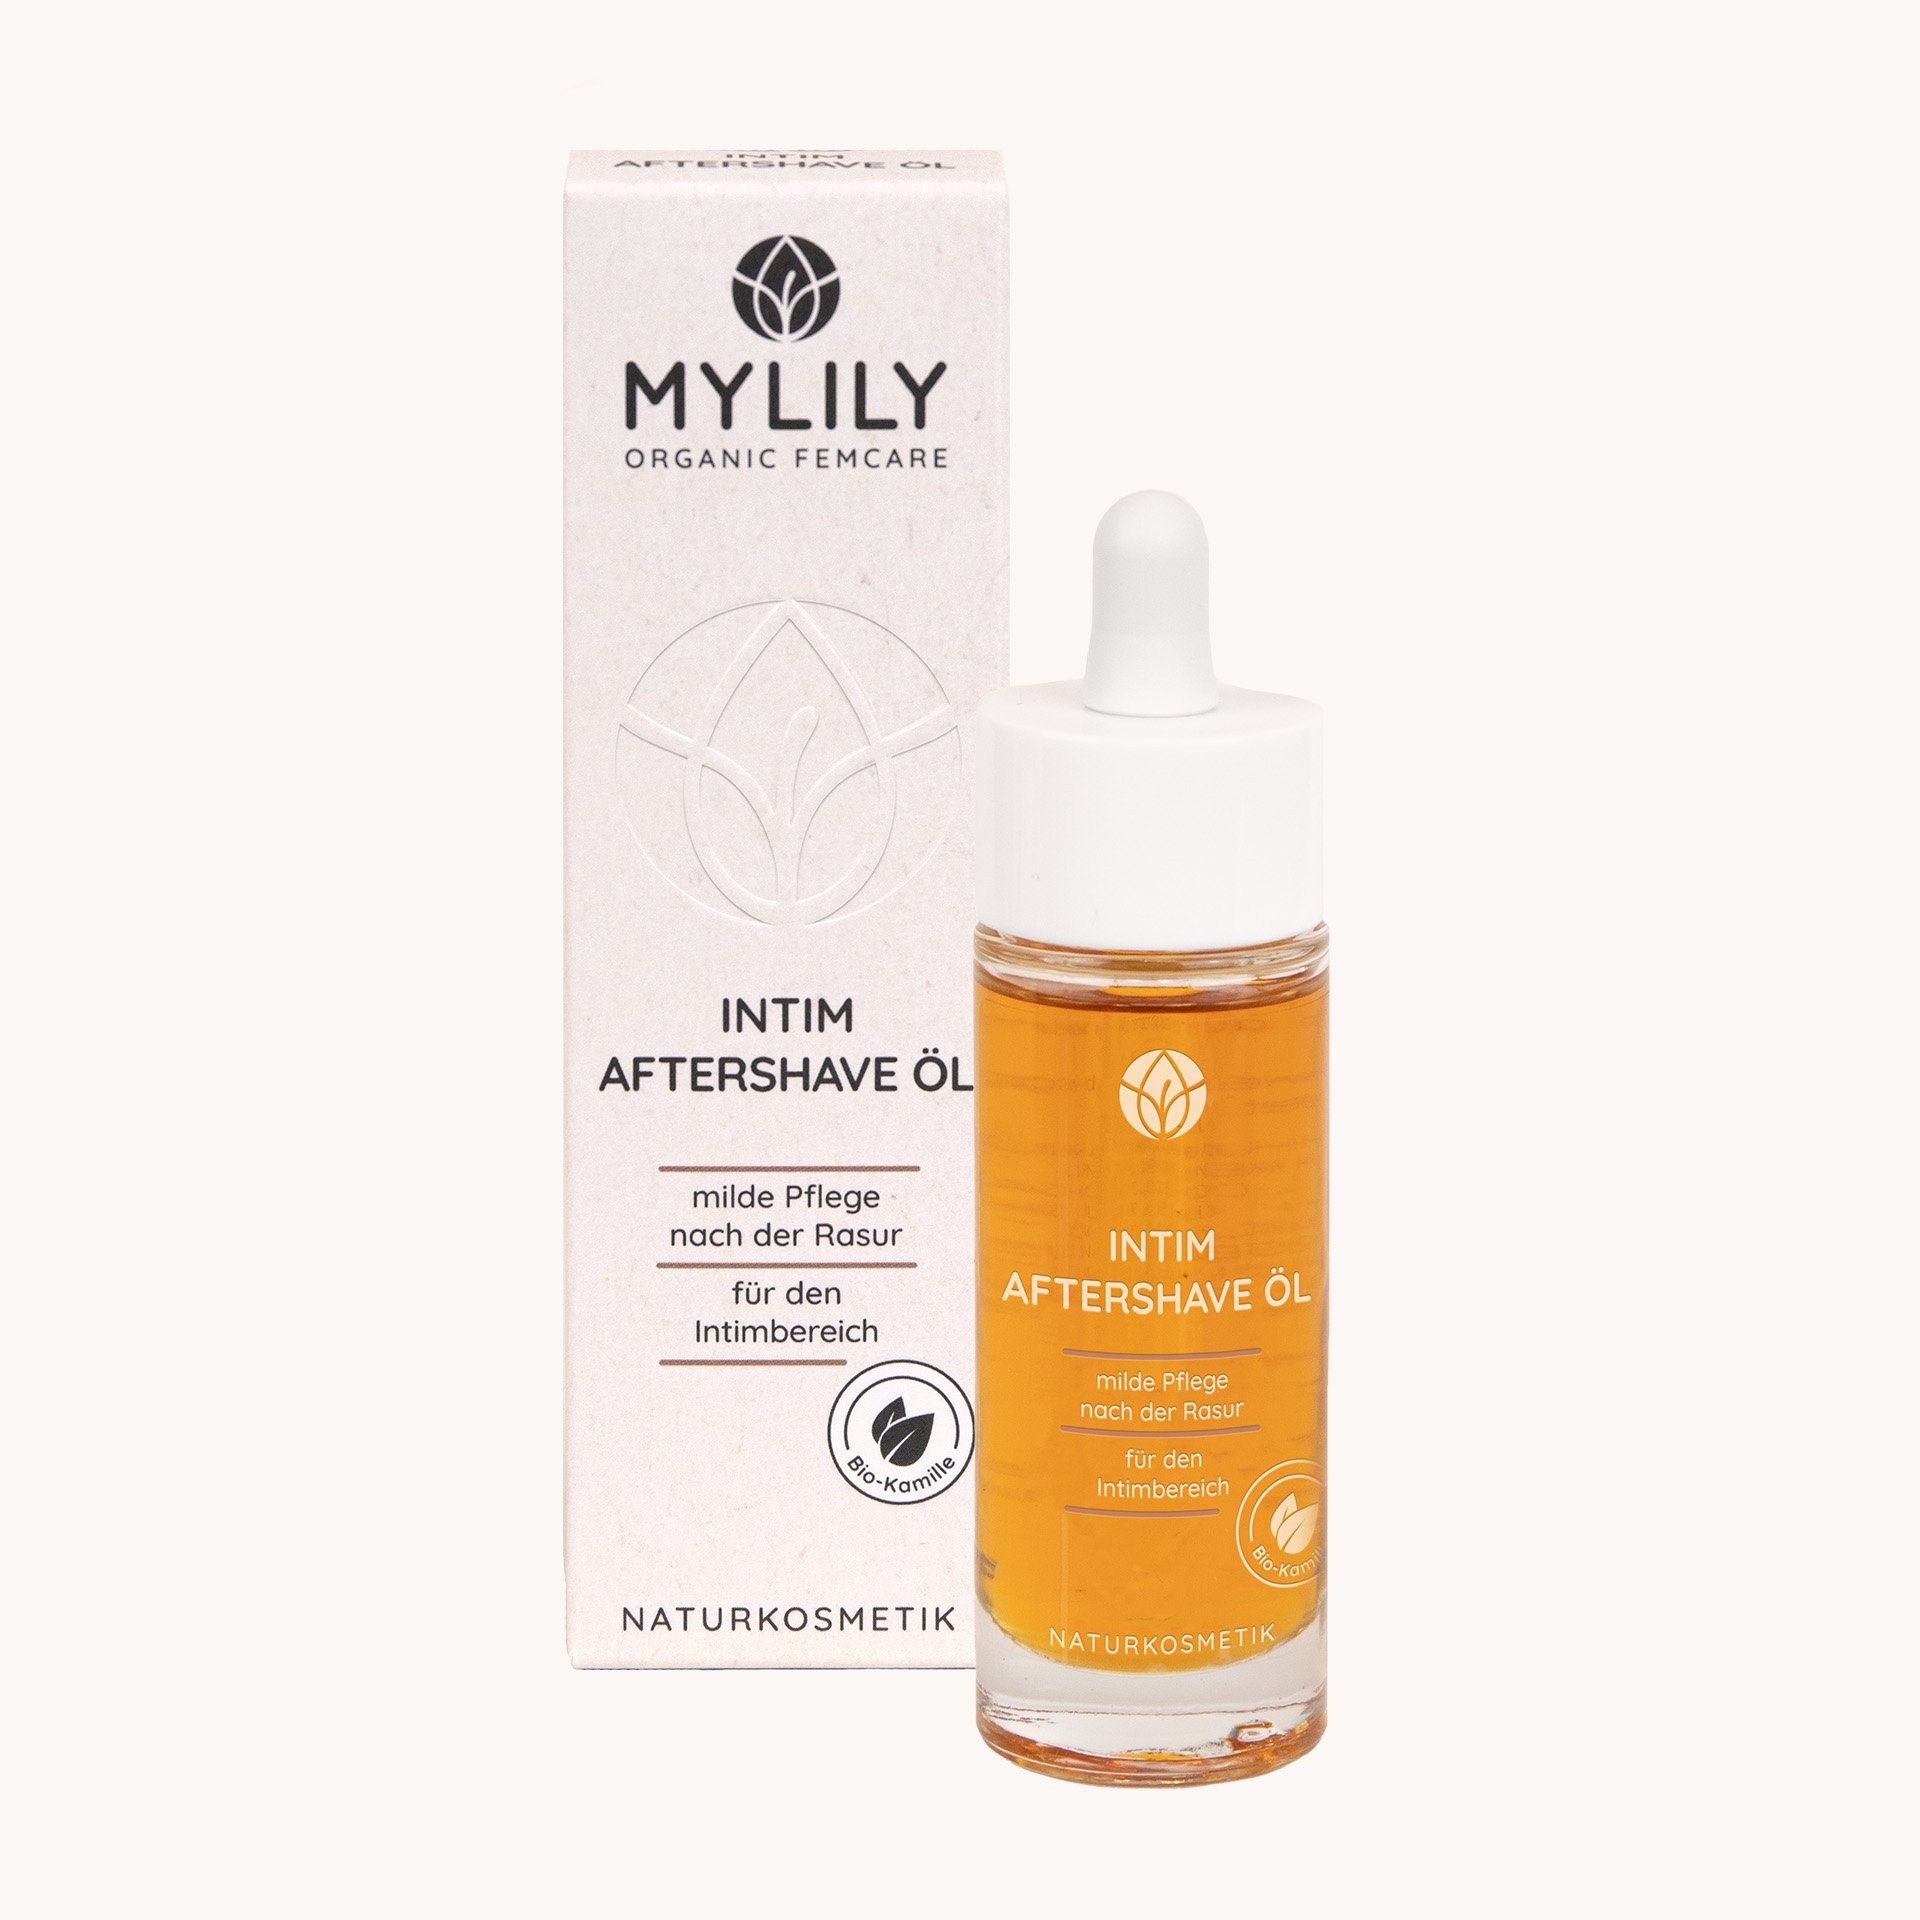 Lotion mit Bio-Kamille, 1-tlg. MYLILY After Aftershave Shave Öl Intim